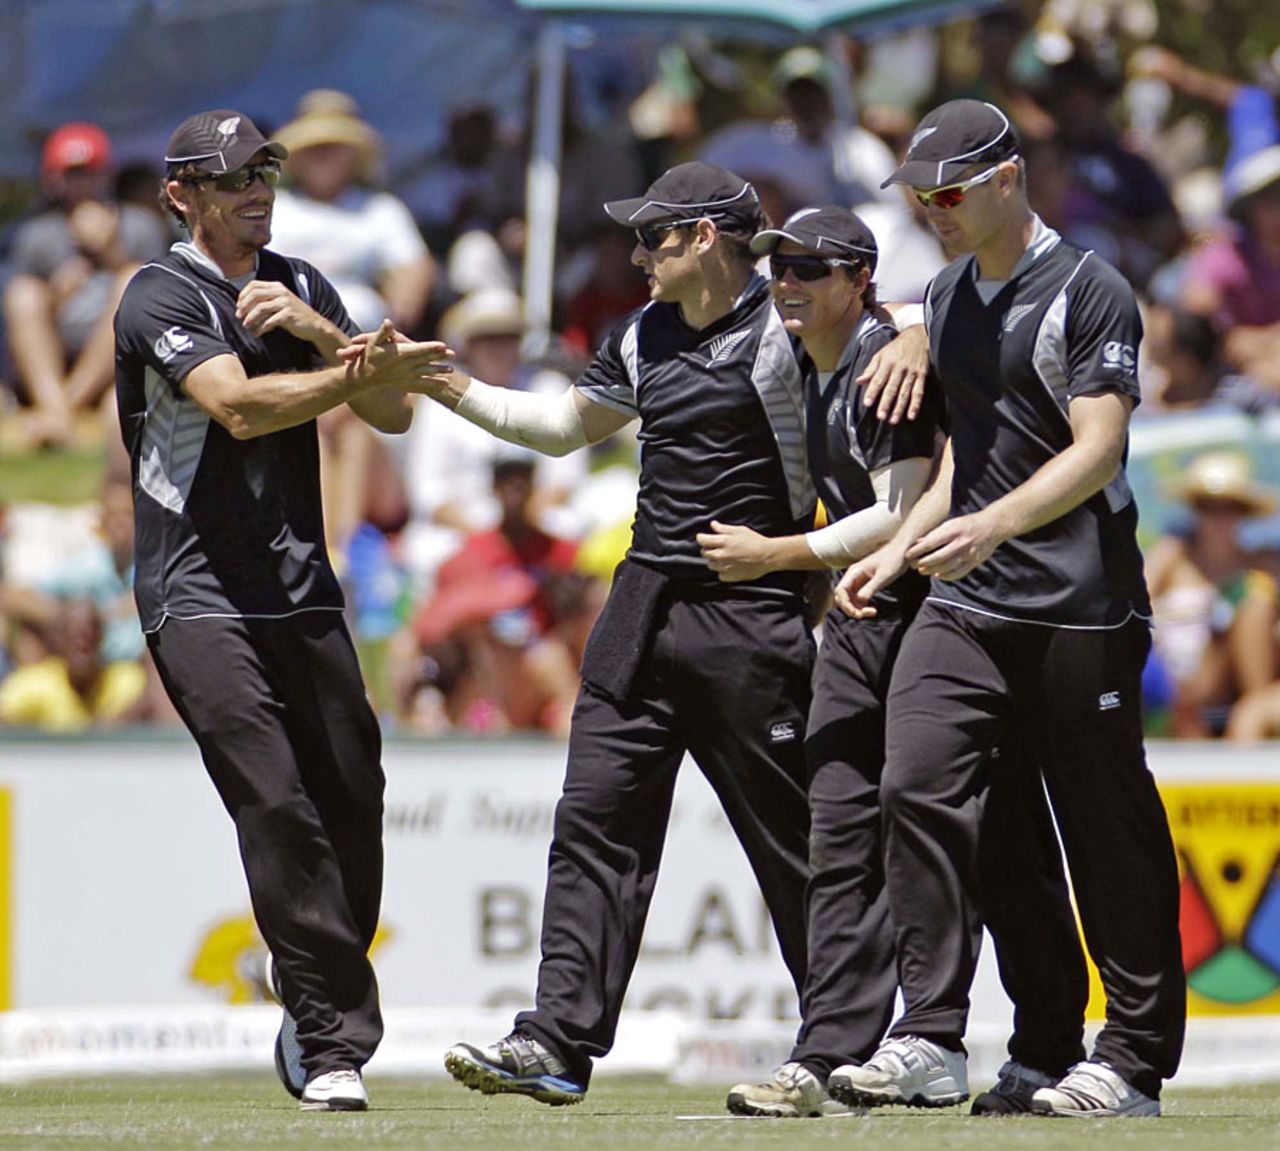 Nathan McCullum gets congratulated after his catch to remove Colin Ingram, South Africa v New Zealand, 1st ODI, Paarl, January 19, 2013